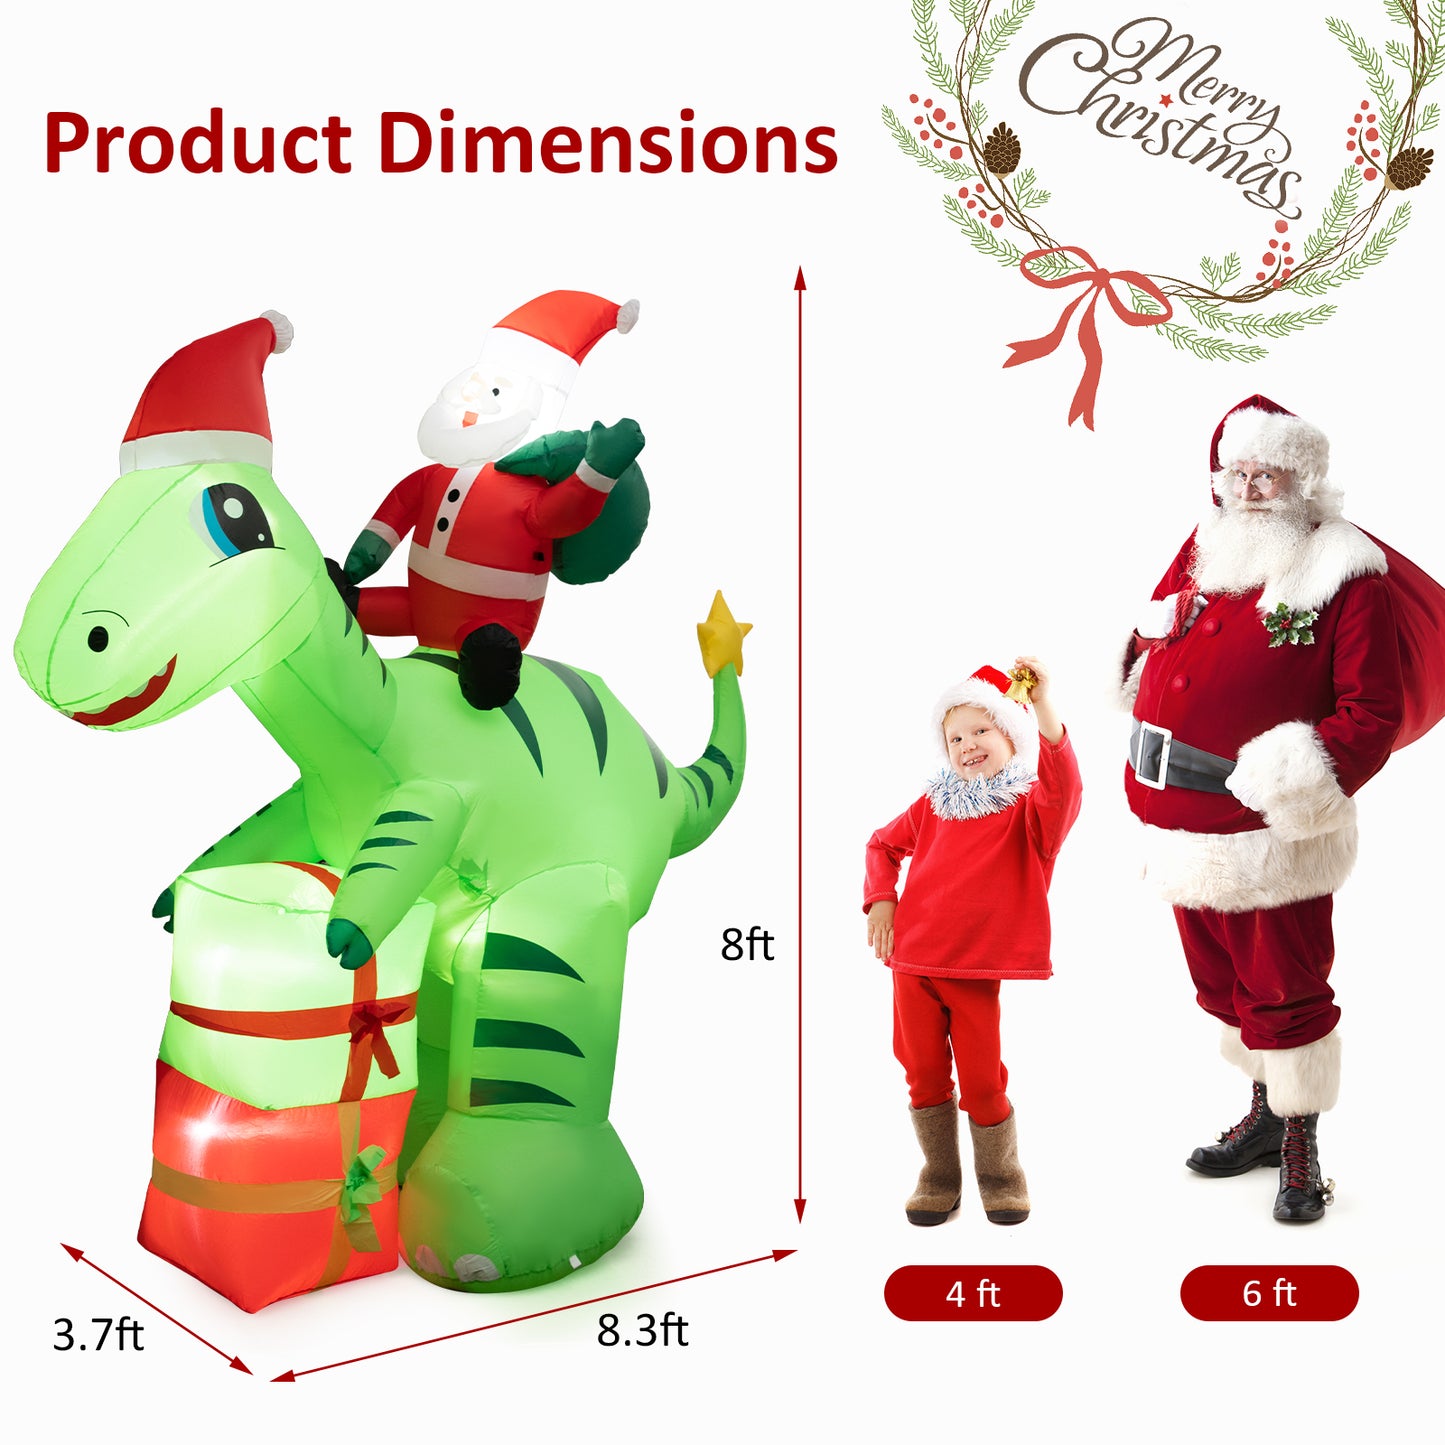 8 Feet Lighted Christmas Inflatable Santa Claus Dinosaur Decoration with Gift Boxes